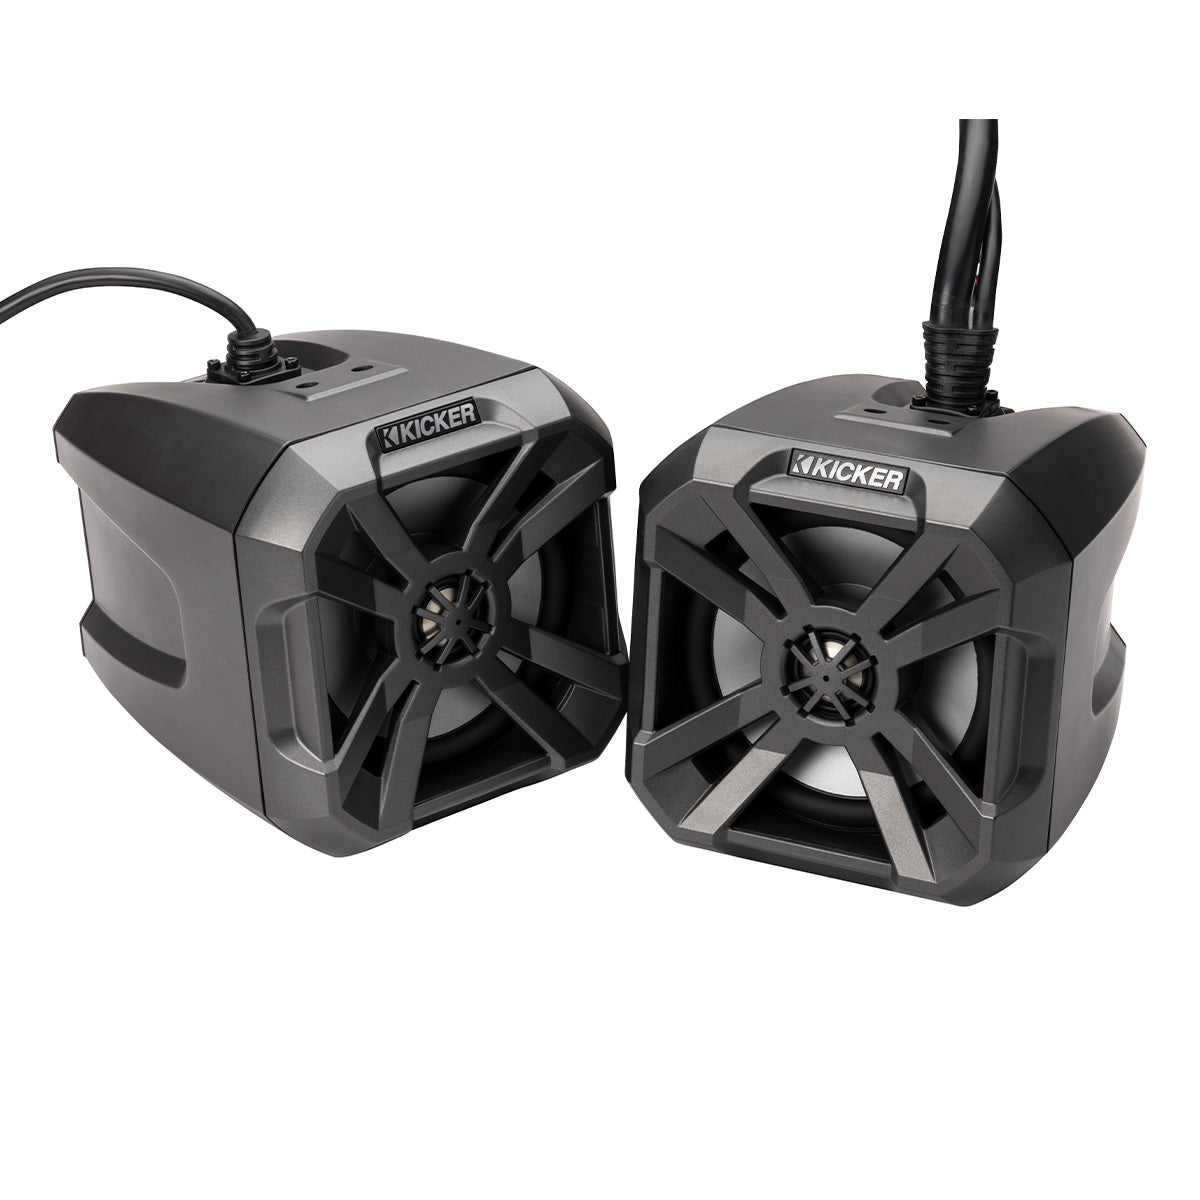 Kicker 48BTCAN65 PowerCan 6.5" Powered Bluetooth Speakers with IP66 Rating, LED Lighting, and Wired Remote - Pair